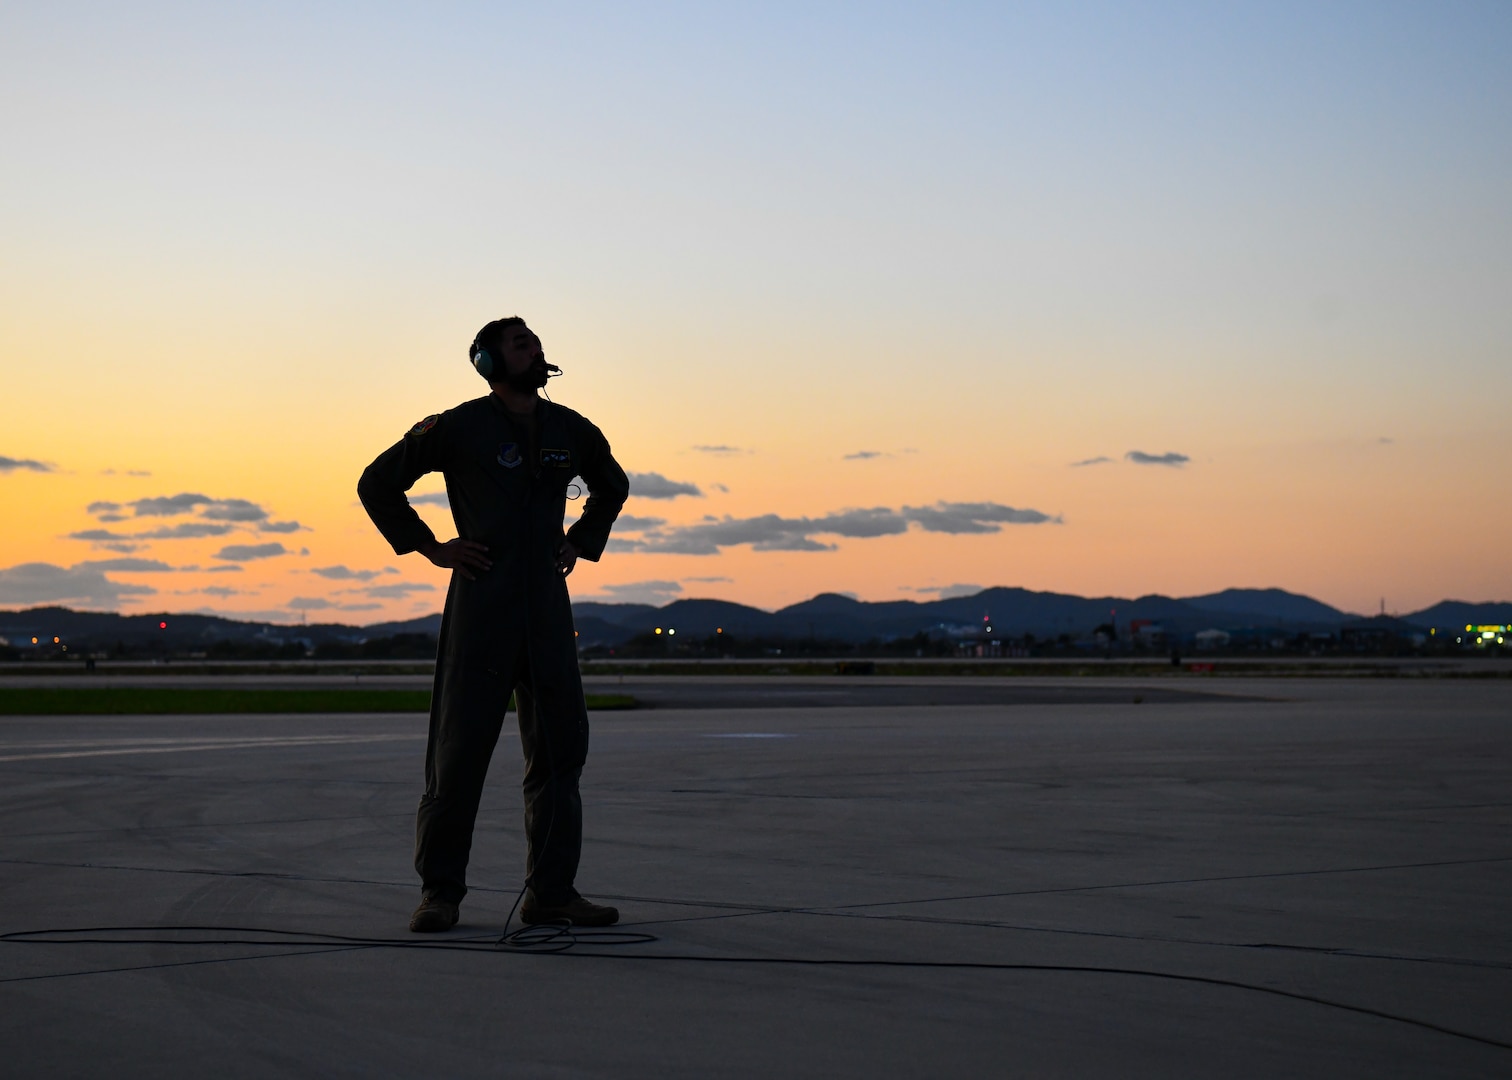 U.S. Air Force Staff Sgt. D’Angelo Seabron, 36th Airlift Squadron loadmaster, performs a preflight check at Osan Air Base, South Korea, during Exercise Beverly Morning 24-1, Oct. 20, 2023. Exercise Beverly Morning is Yokota’s annual readiness exercise, designed to ensure Yokota is ready to respond rapidly to any potential real-world crisis. (U.S. Air Force Photo by Staff Sgt. Spencer Tobler)